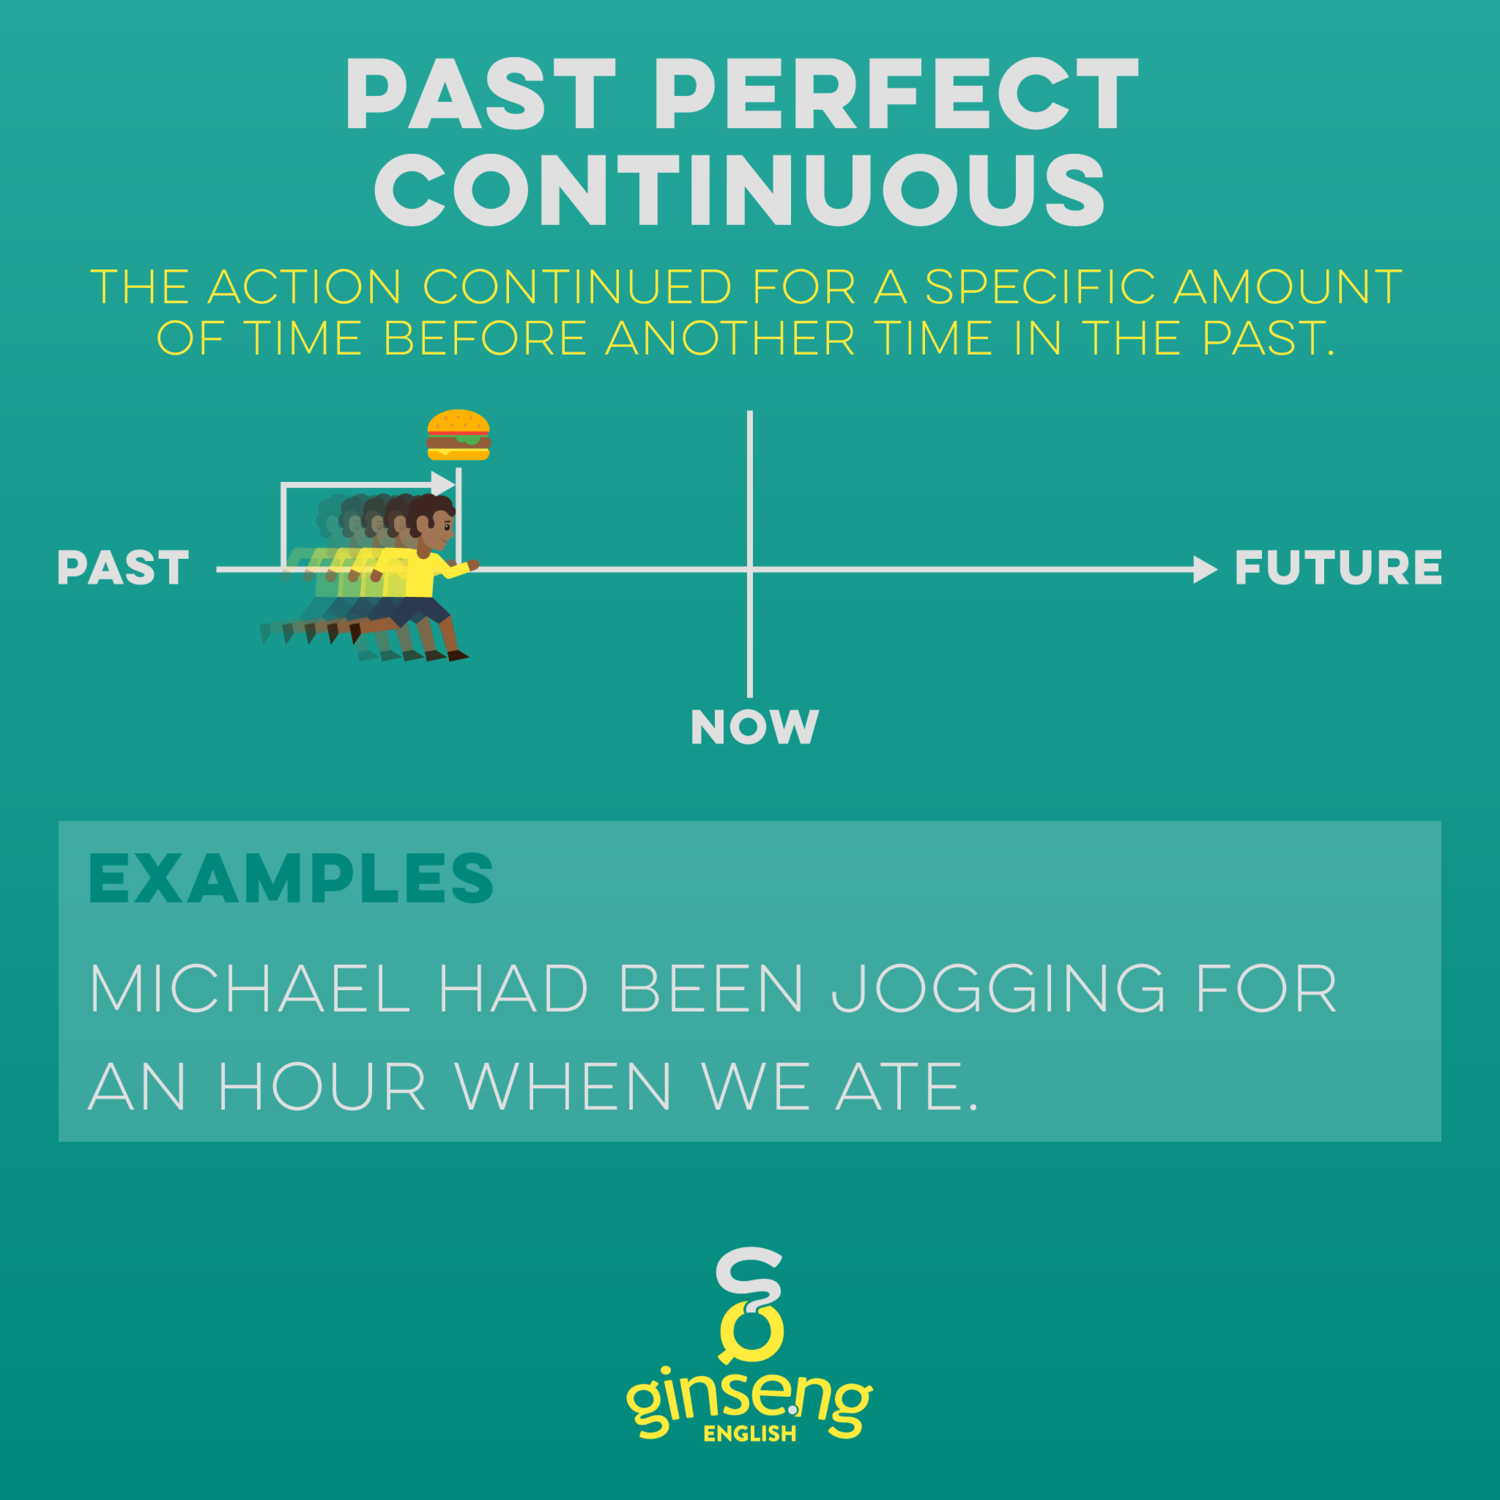 past-perfect-continuous-tense-ginseng-english-learn-english